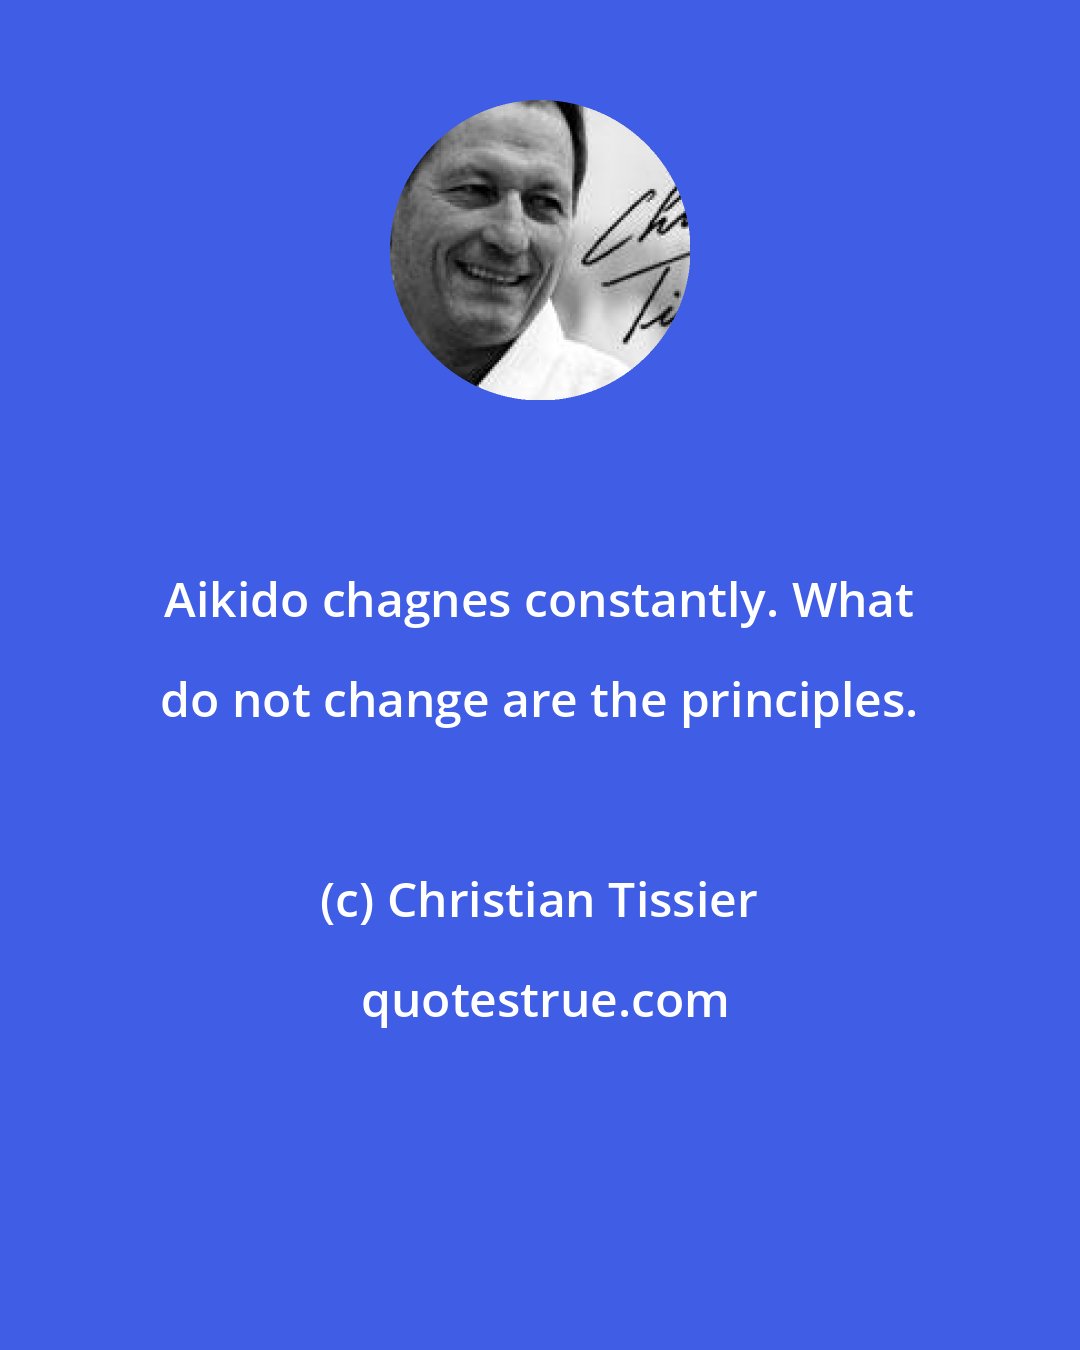 Christian Tissier: Aikido chagnes constantly. What do not change are the principles.